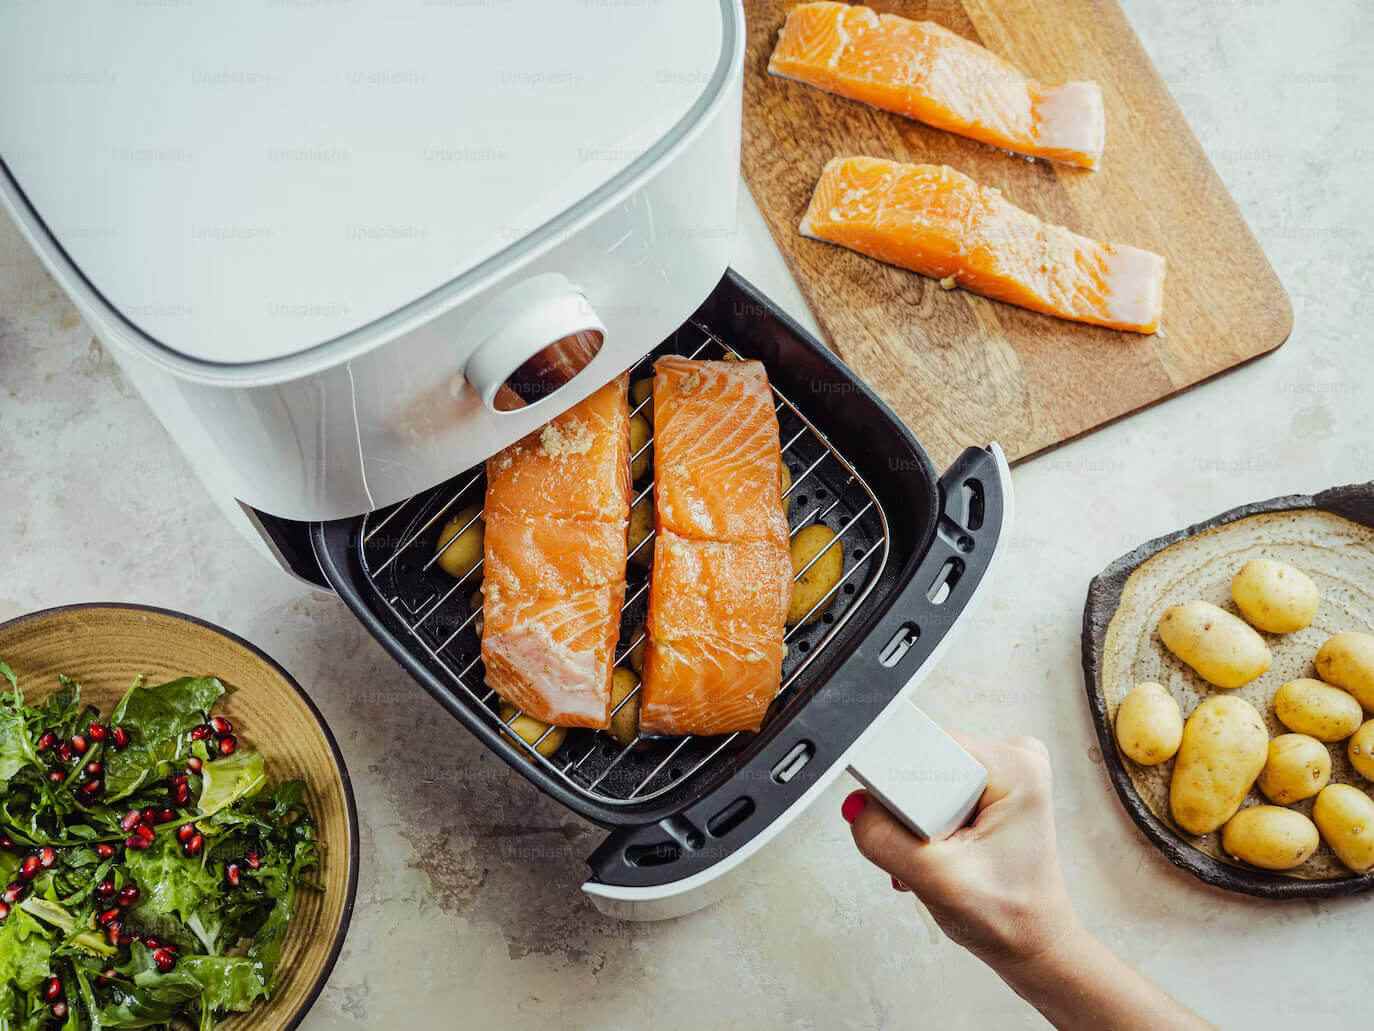 Best Non-Toxic Air Fryer: A Healthy Choice for Modern Kitchens